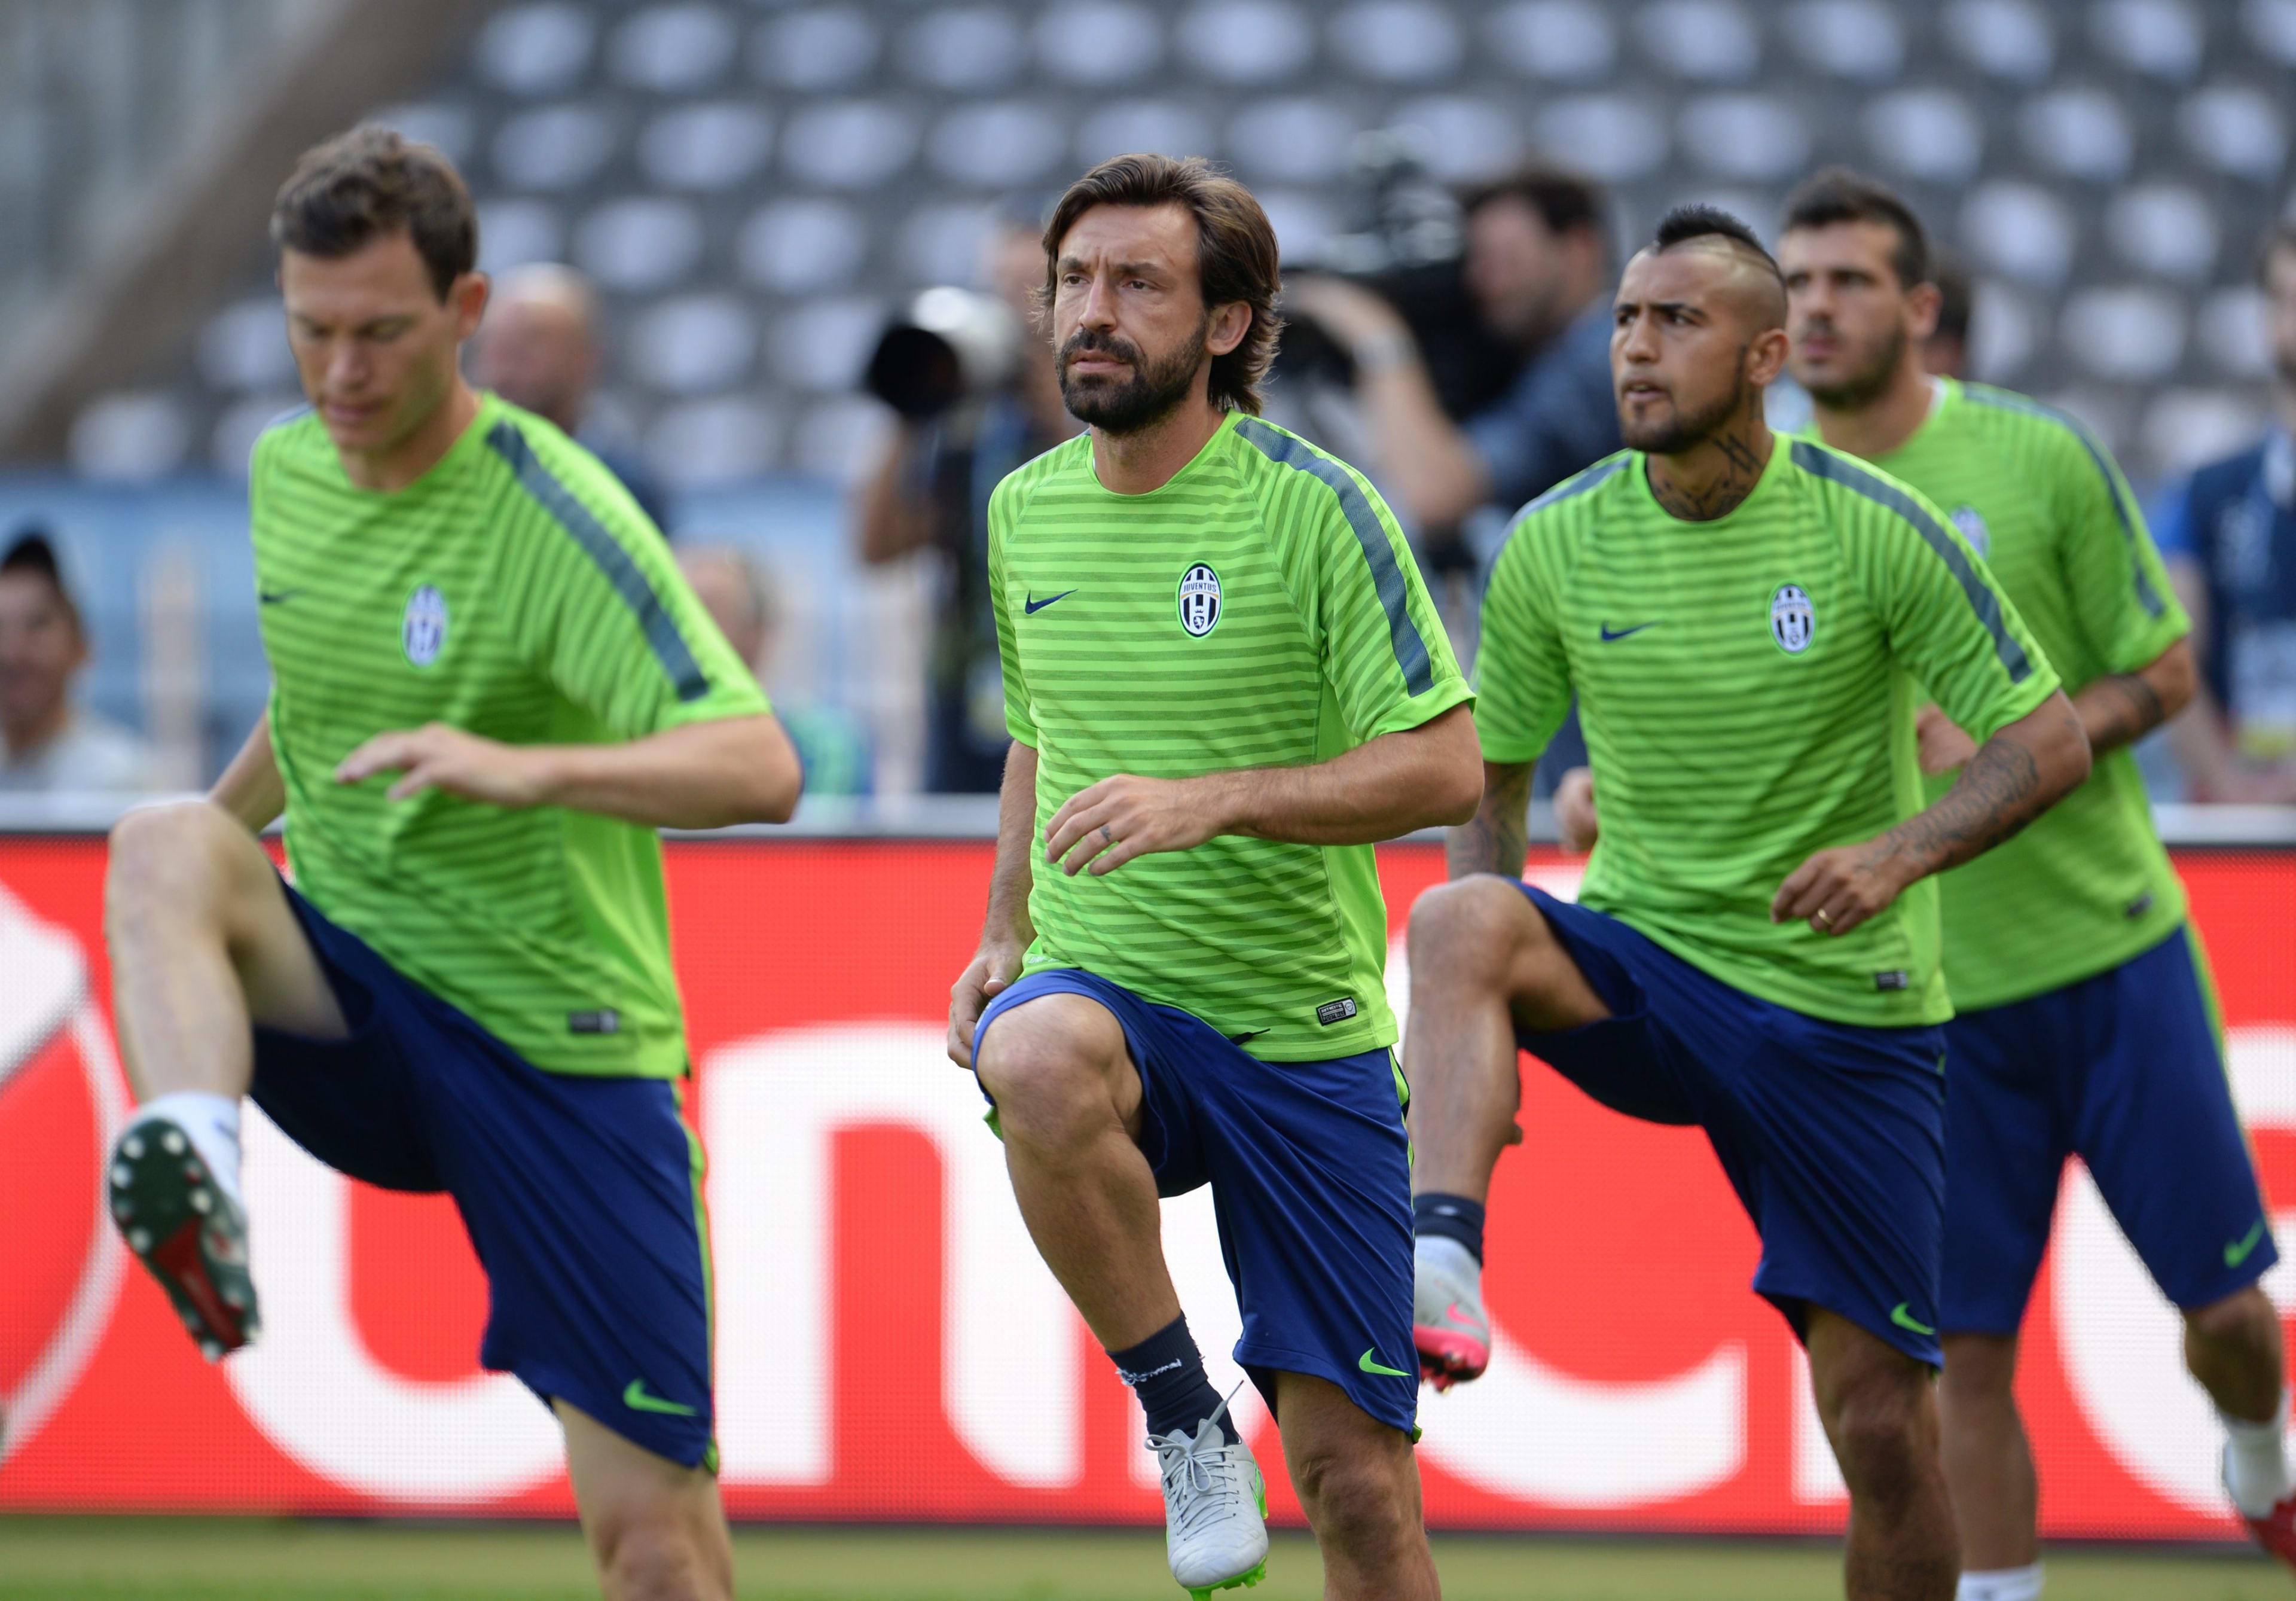 QUOTE: Pirlo over warming up's 